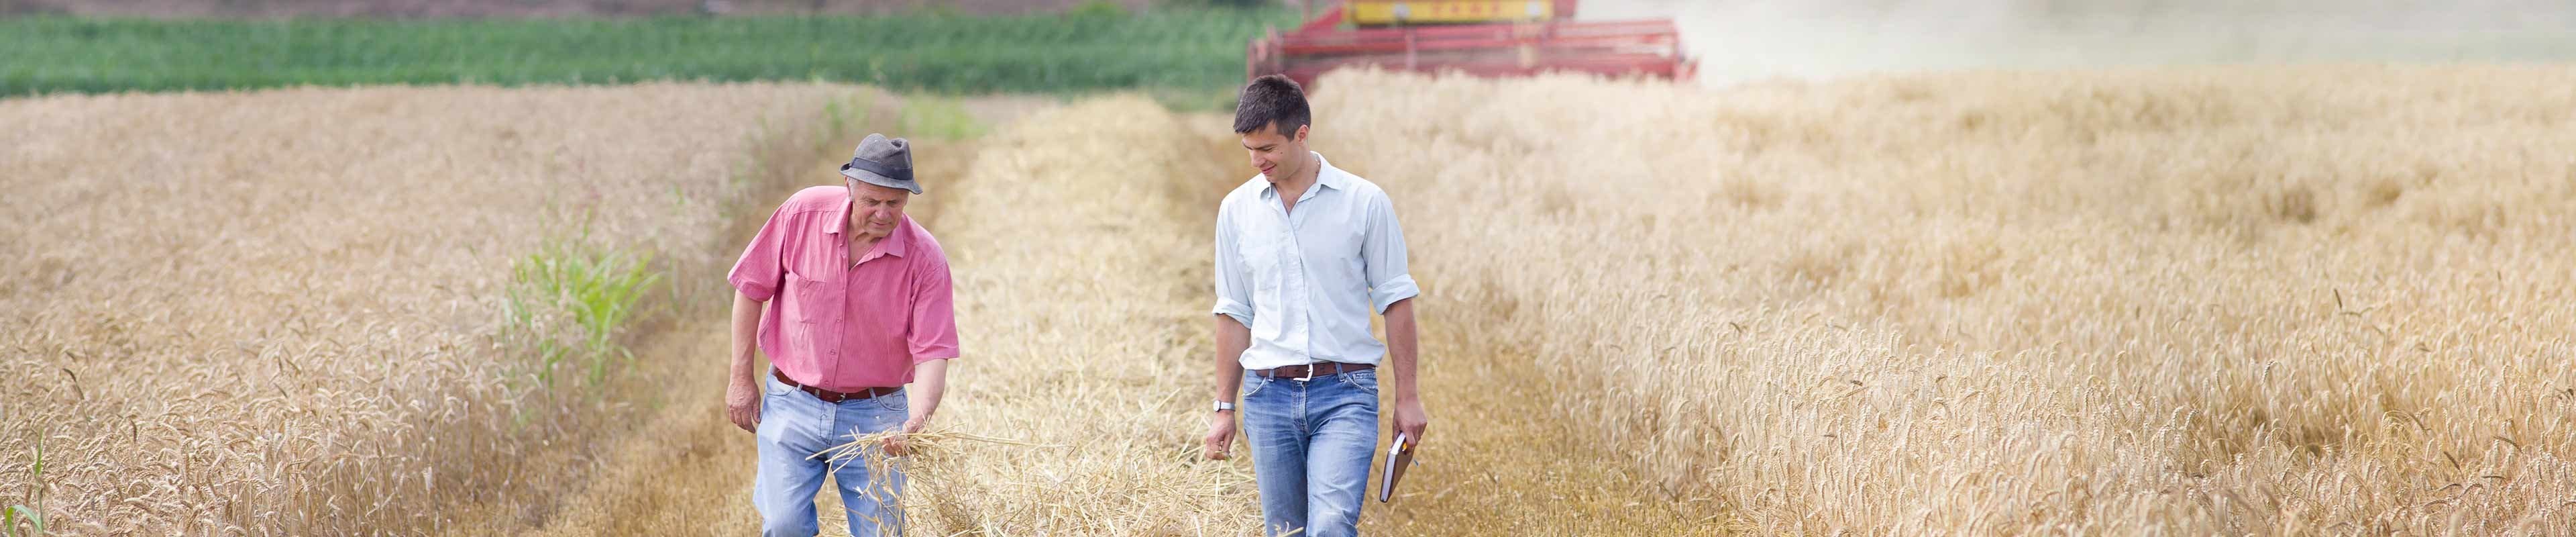 Image of a new employee with farm owner walking in a wheat field.